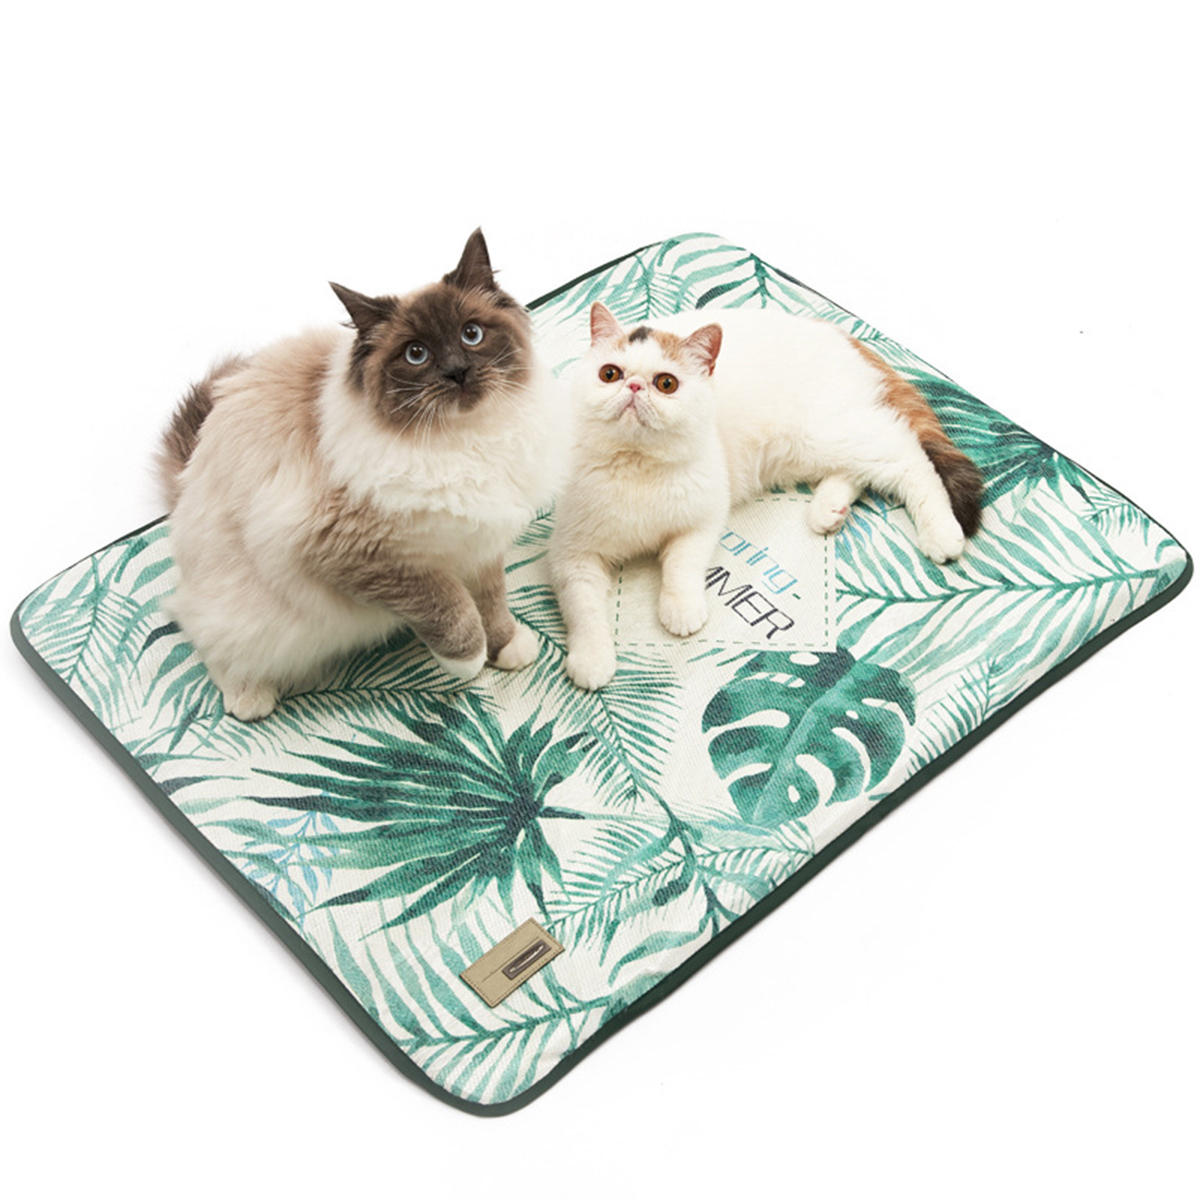 

Dog Cooling Mat Pet Cat Chilly Breathable Non-Skid Summer Cool Bed Pad Cushion Pet Carpet